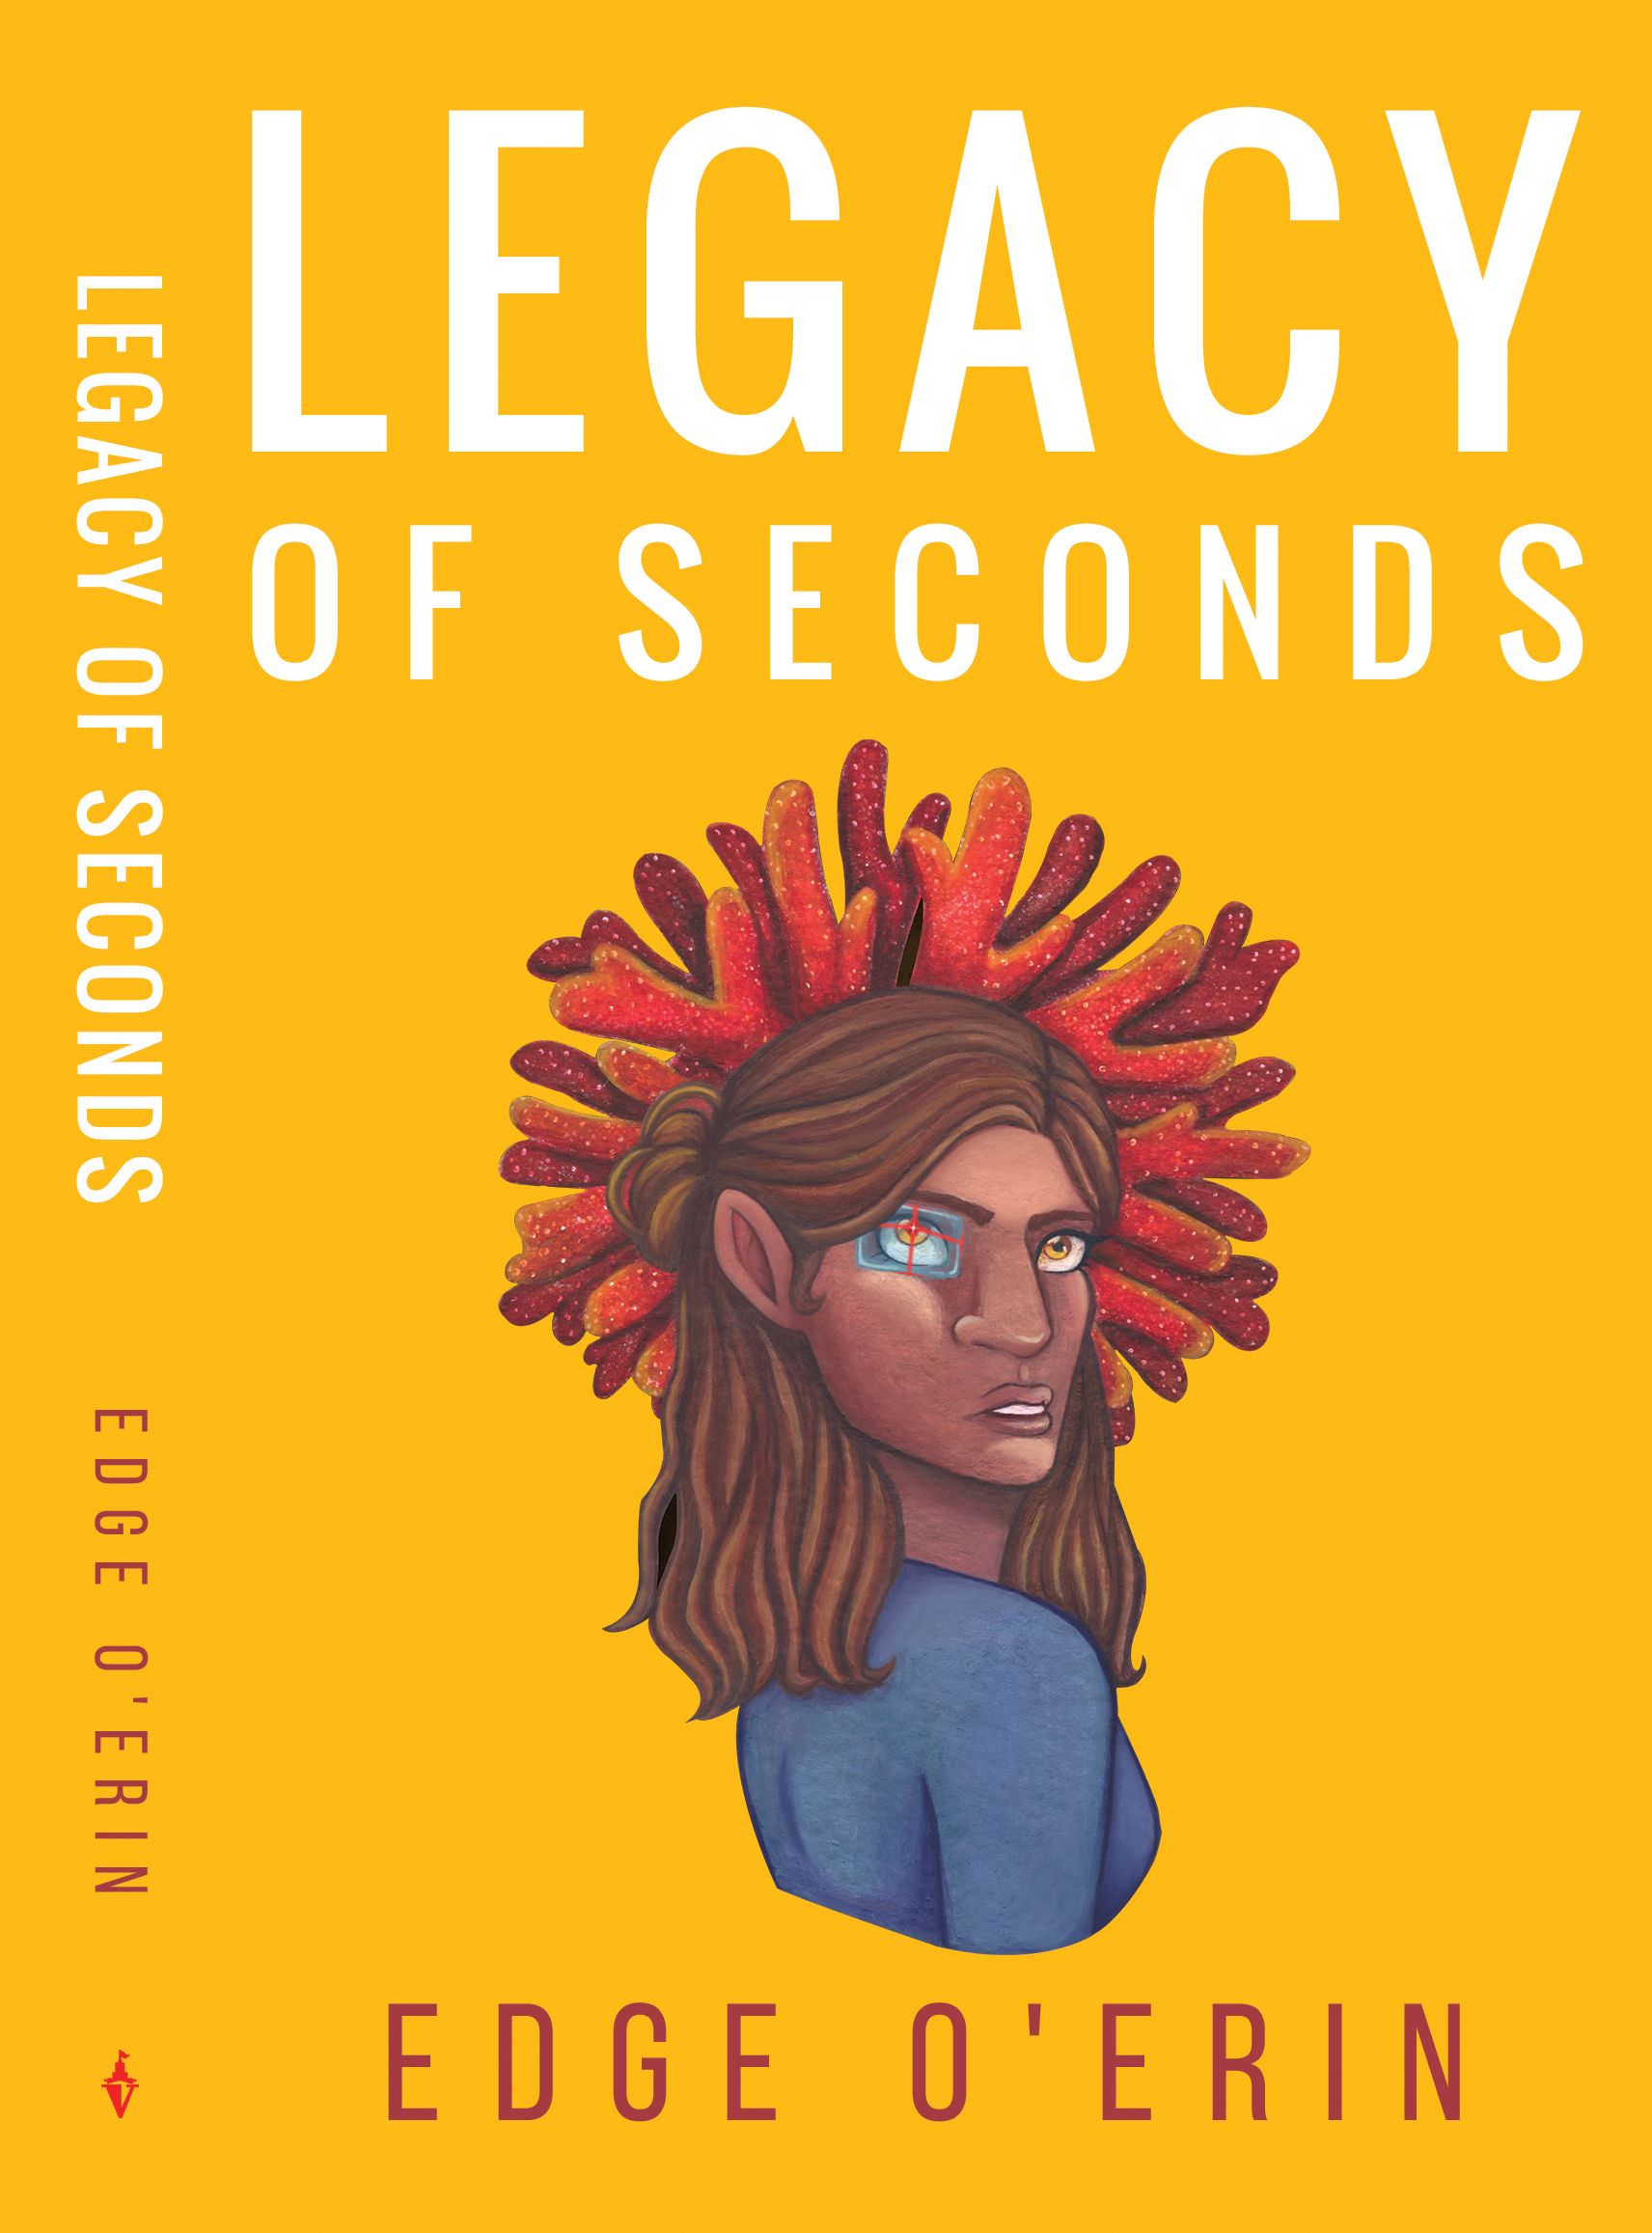 Image of the front cover of Legacy of Seconds which is a prequel to Terraform Charlie